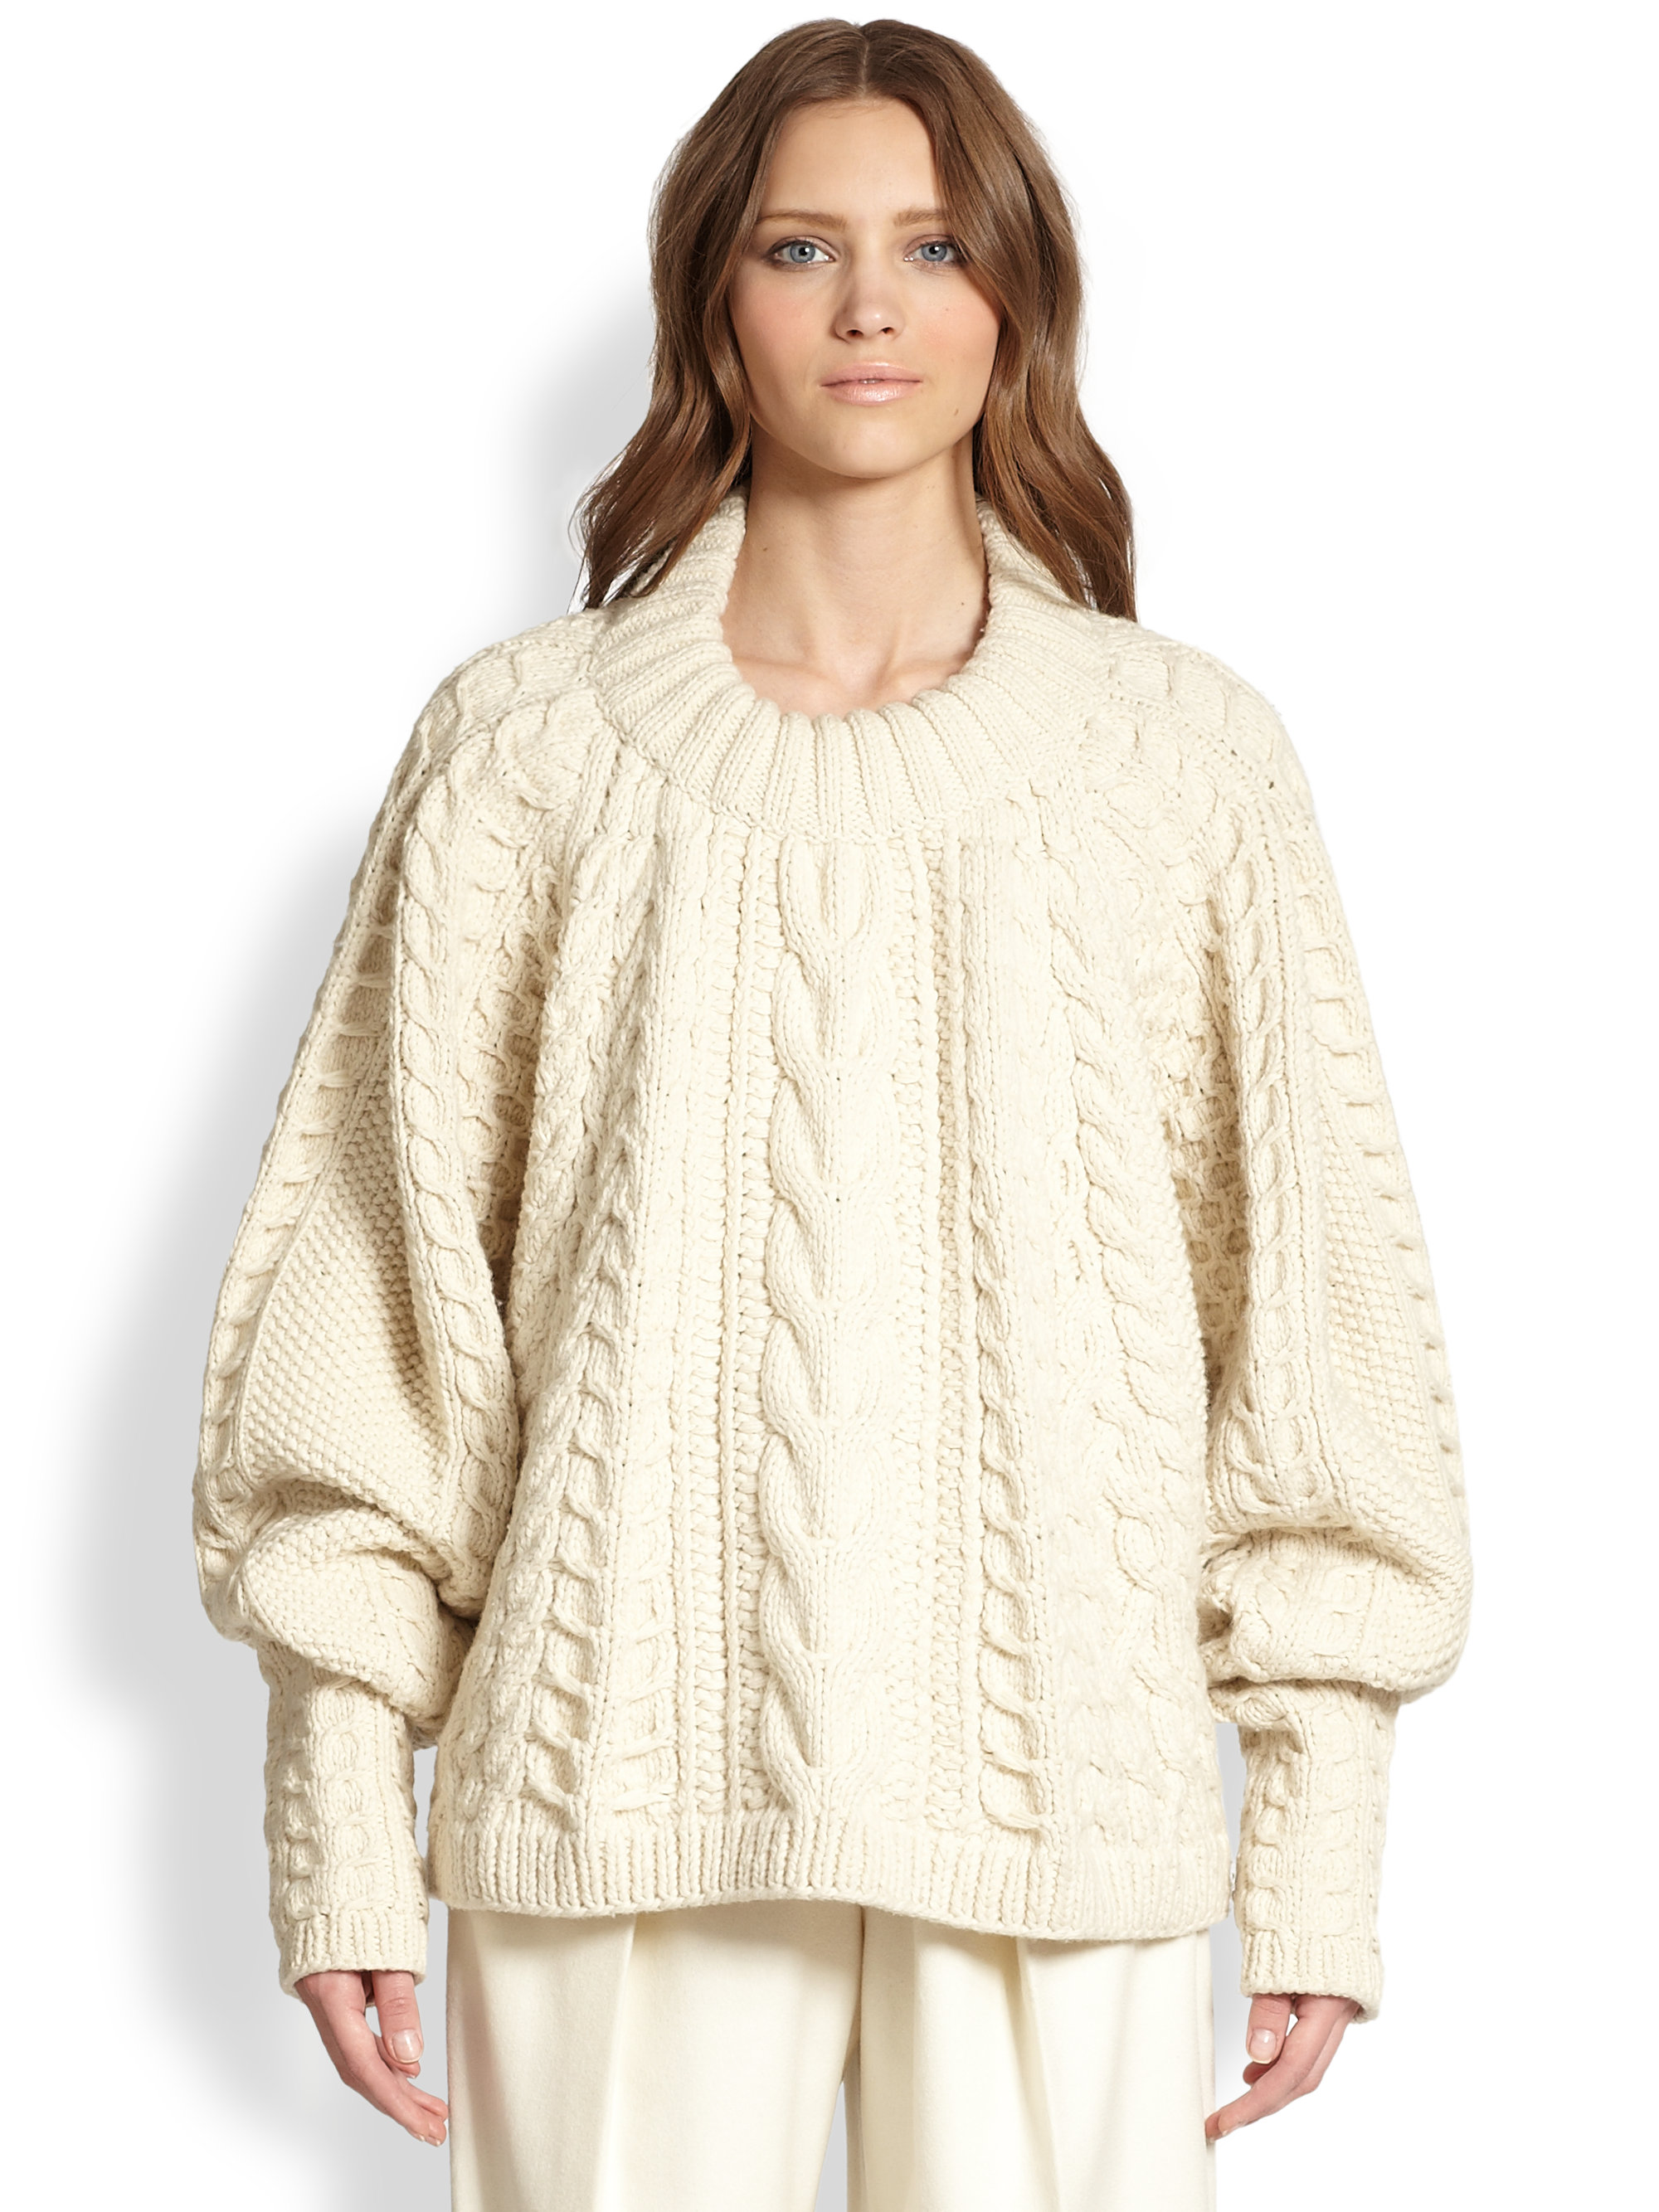 Lyst - The Row Wool Cashmere Cableknit Blouson Sweater in White